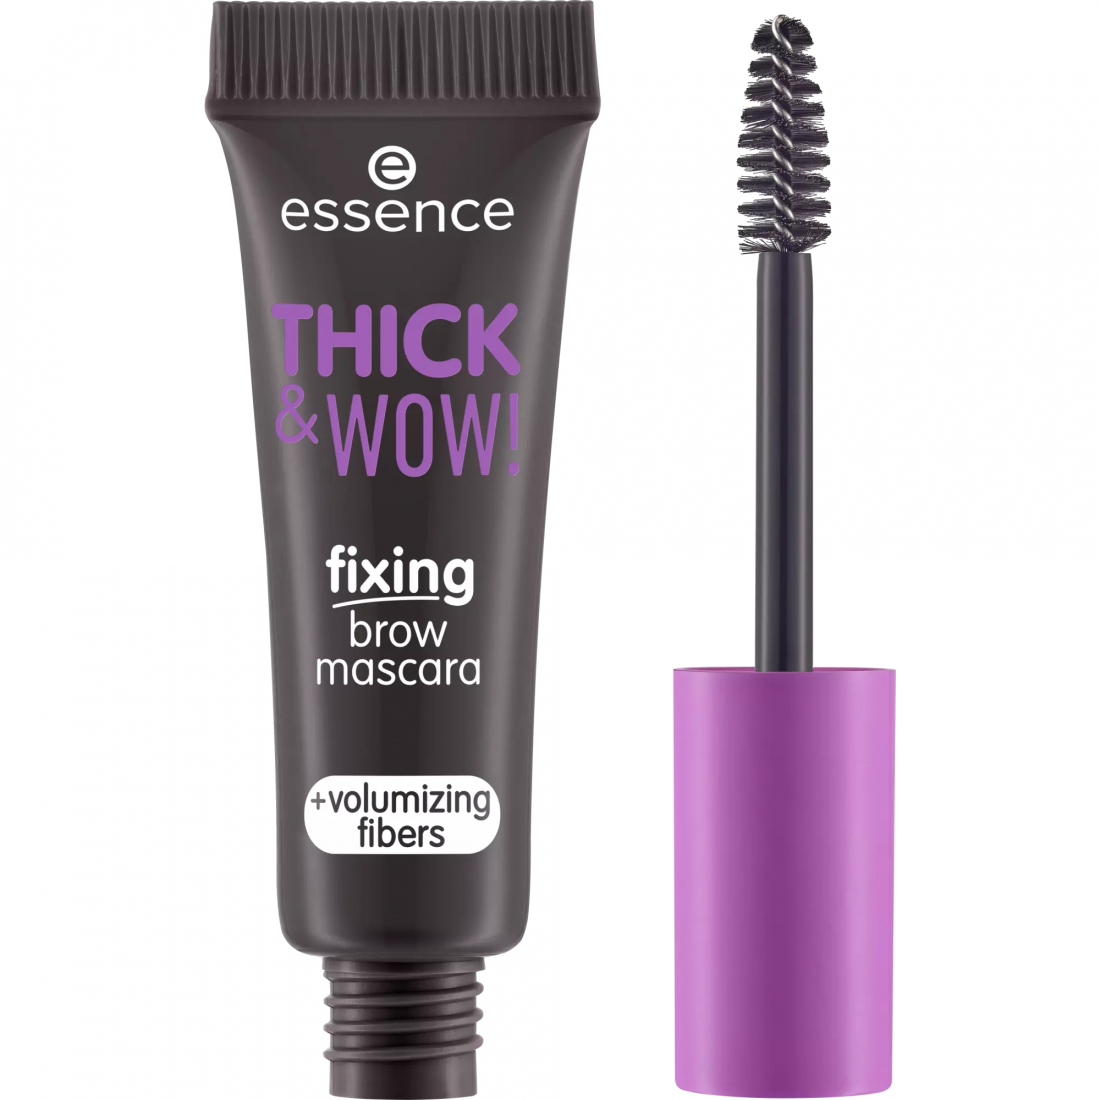 'Thick & Wow! Fixing' Augenbrauen-Mascara - 04 Espresso Brown 6 ml